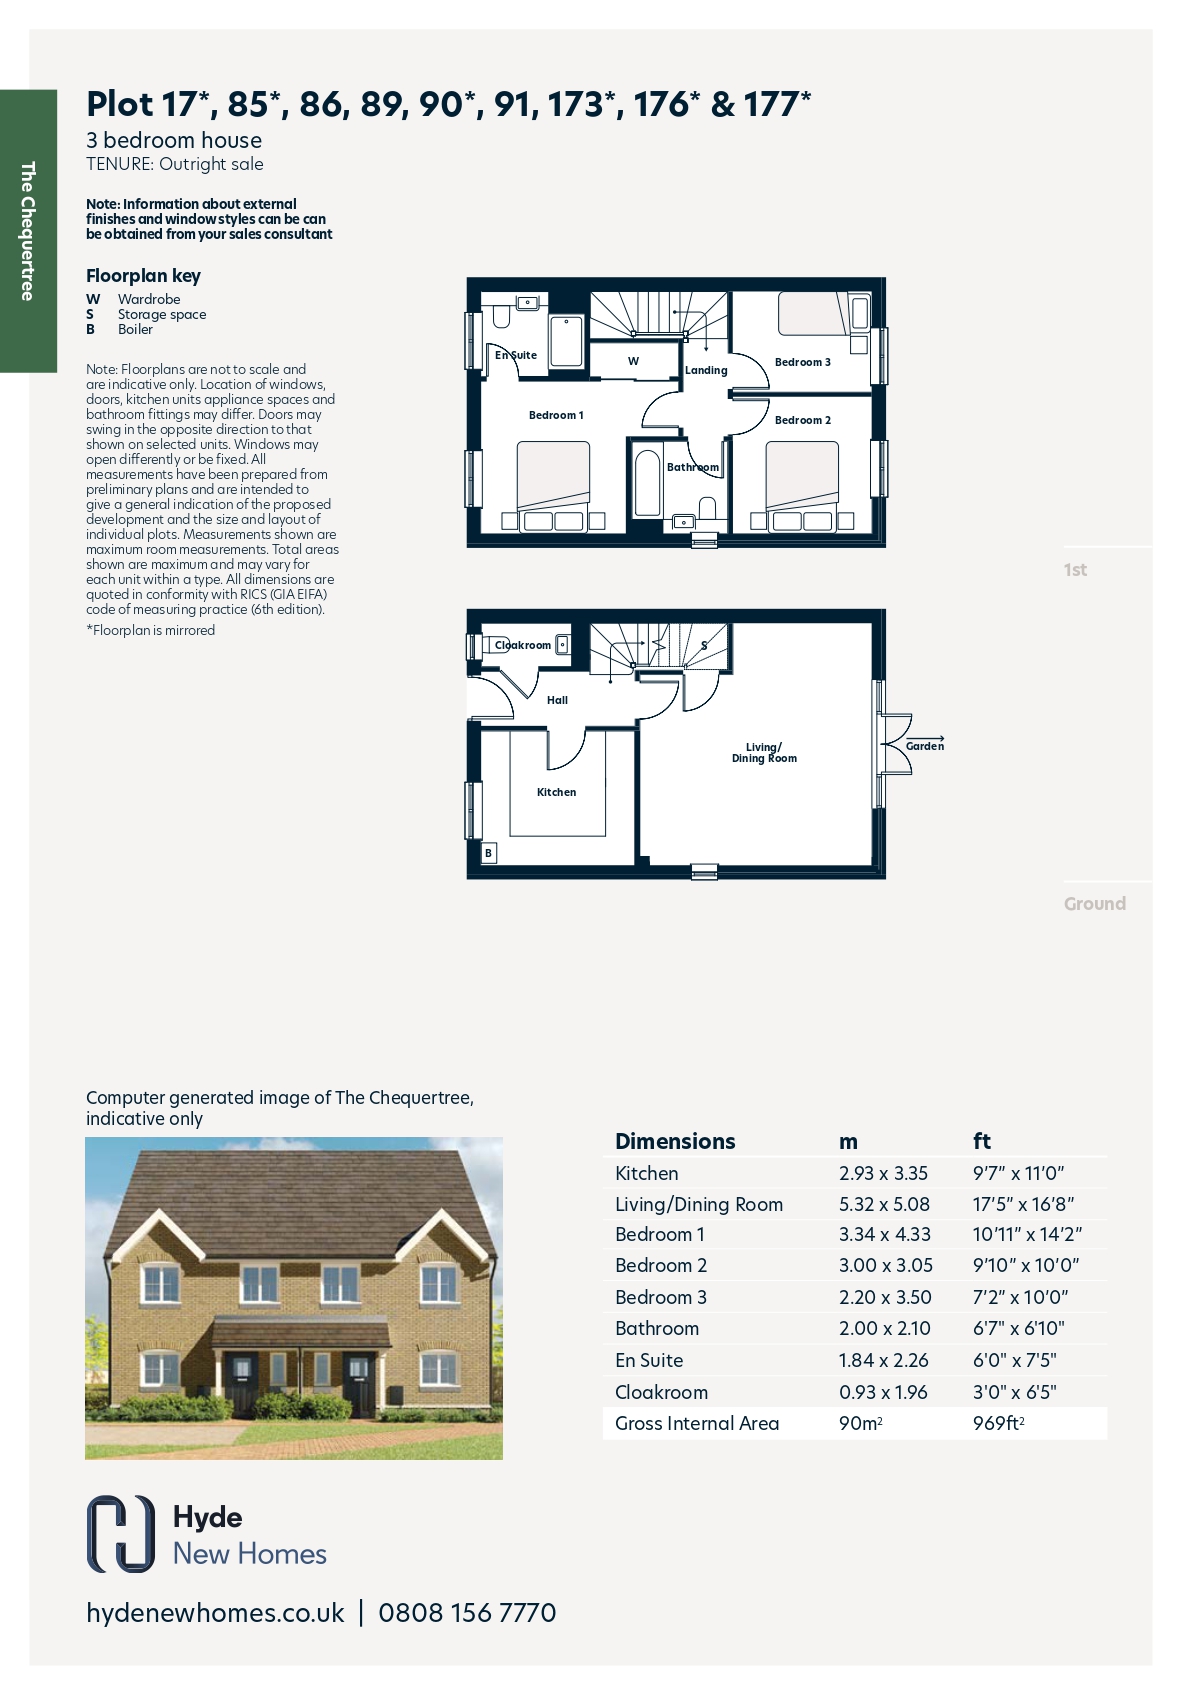 Hyde Spring Acres - The Chequertree Floorplan